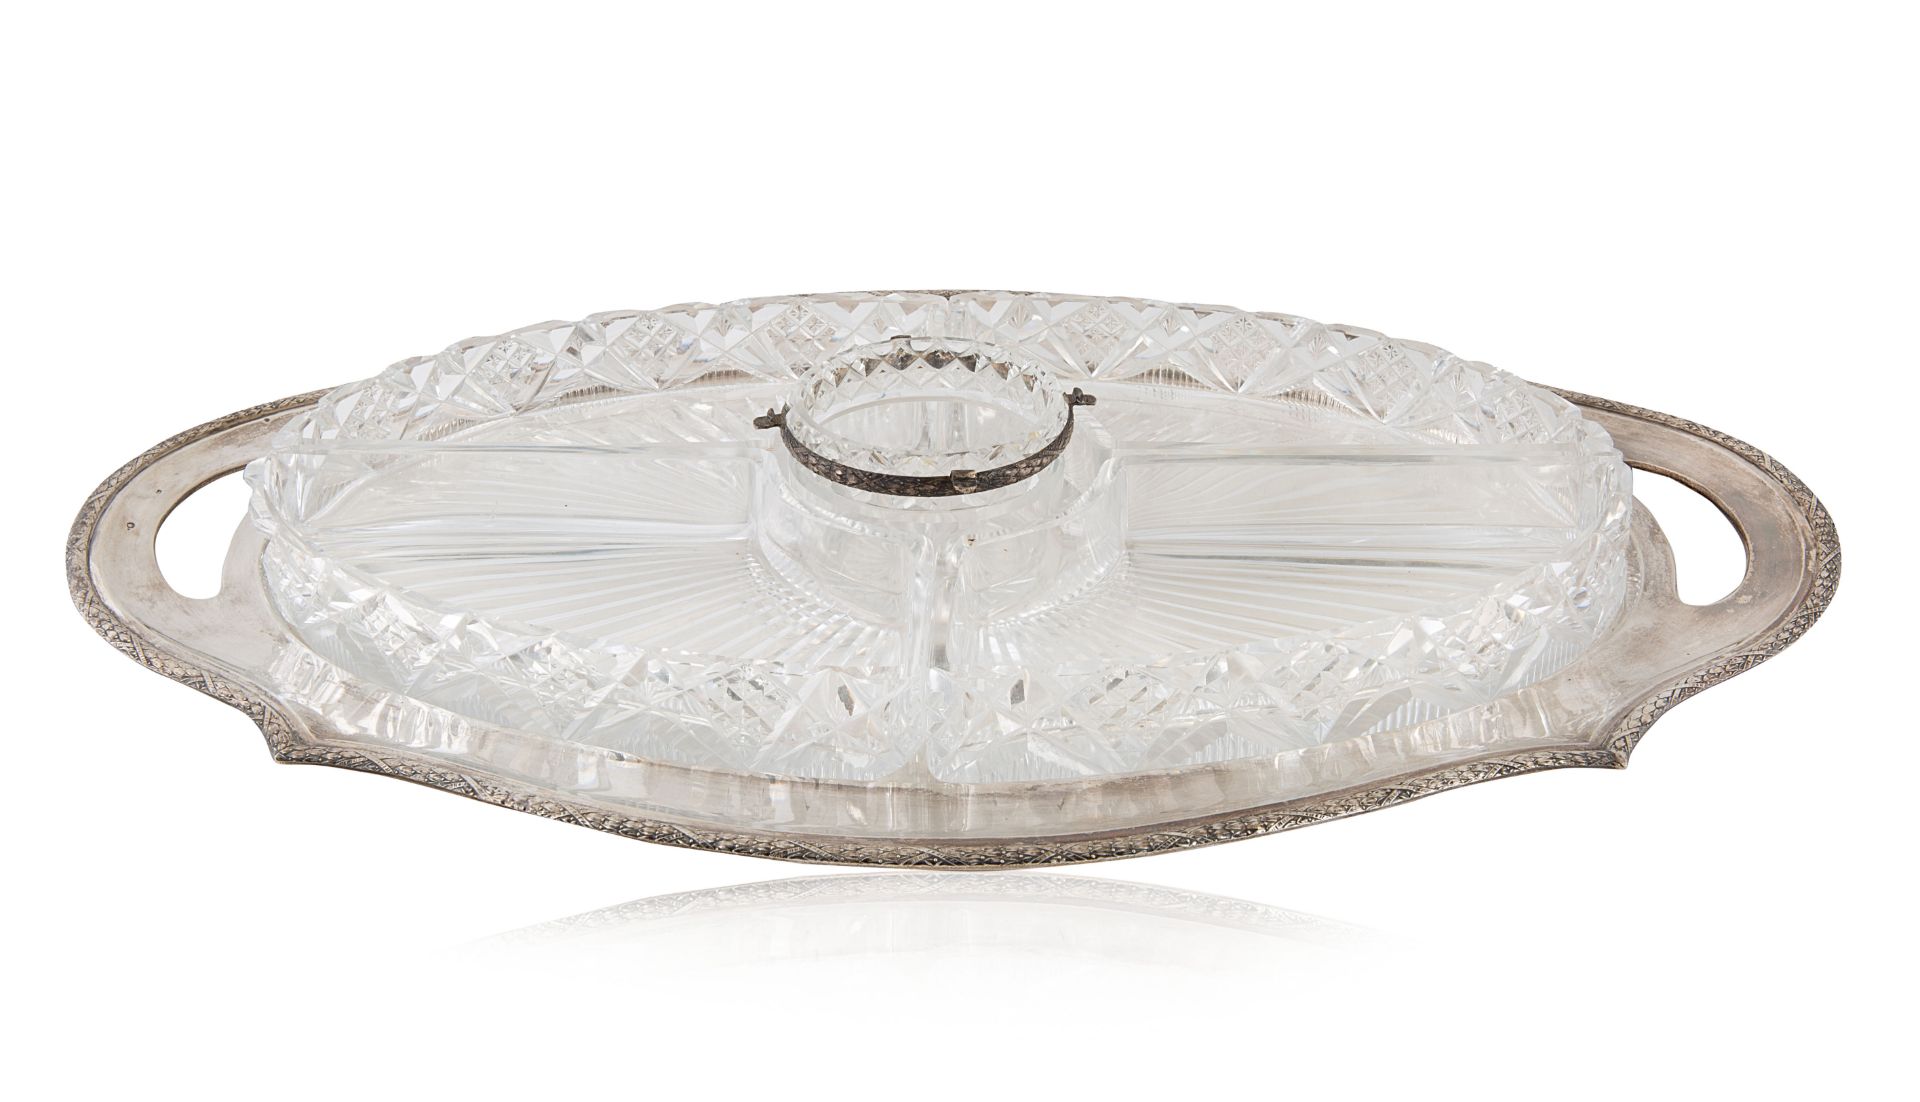 A BRITISH SILVER SERVING TRAY AND CRYSTAL HORS D'OEUVRE FIVE-PIECE SET, ERICH KELLERMAN, 19TH CENTUR